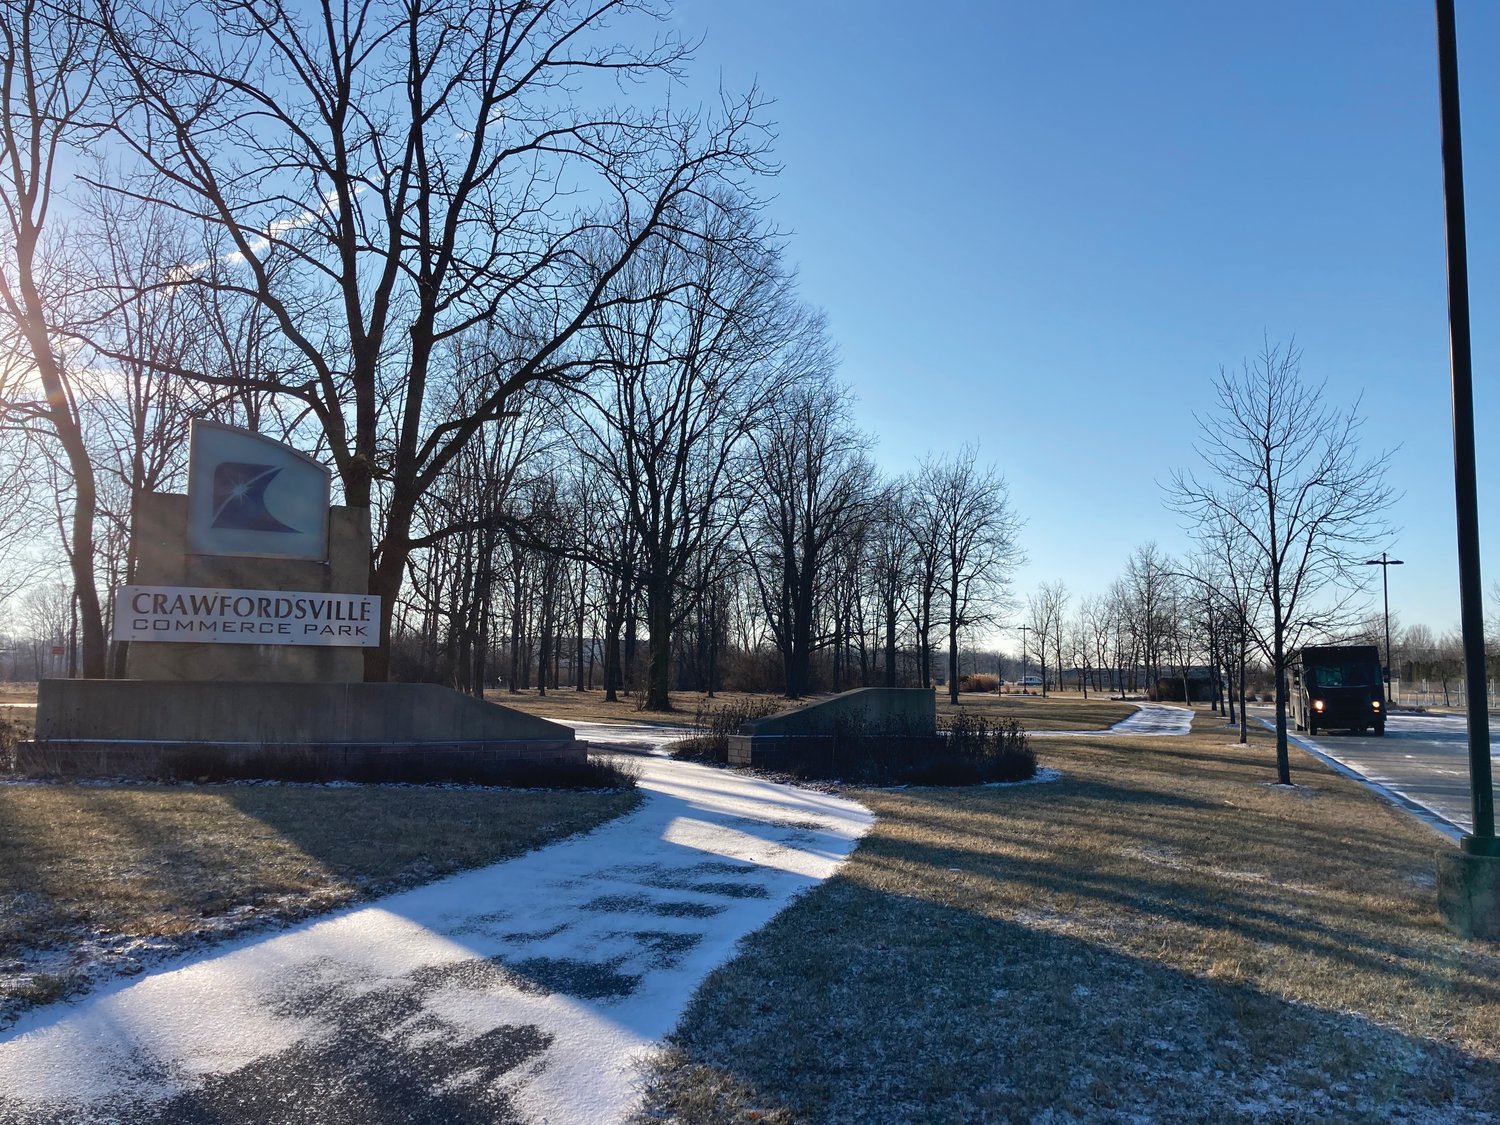 The Crawfordsville Commerce Park, shown here in January, will be full if the city successfully lands new projects in the works, Mayor Todd Barton said in his State of the City address.